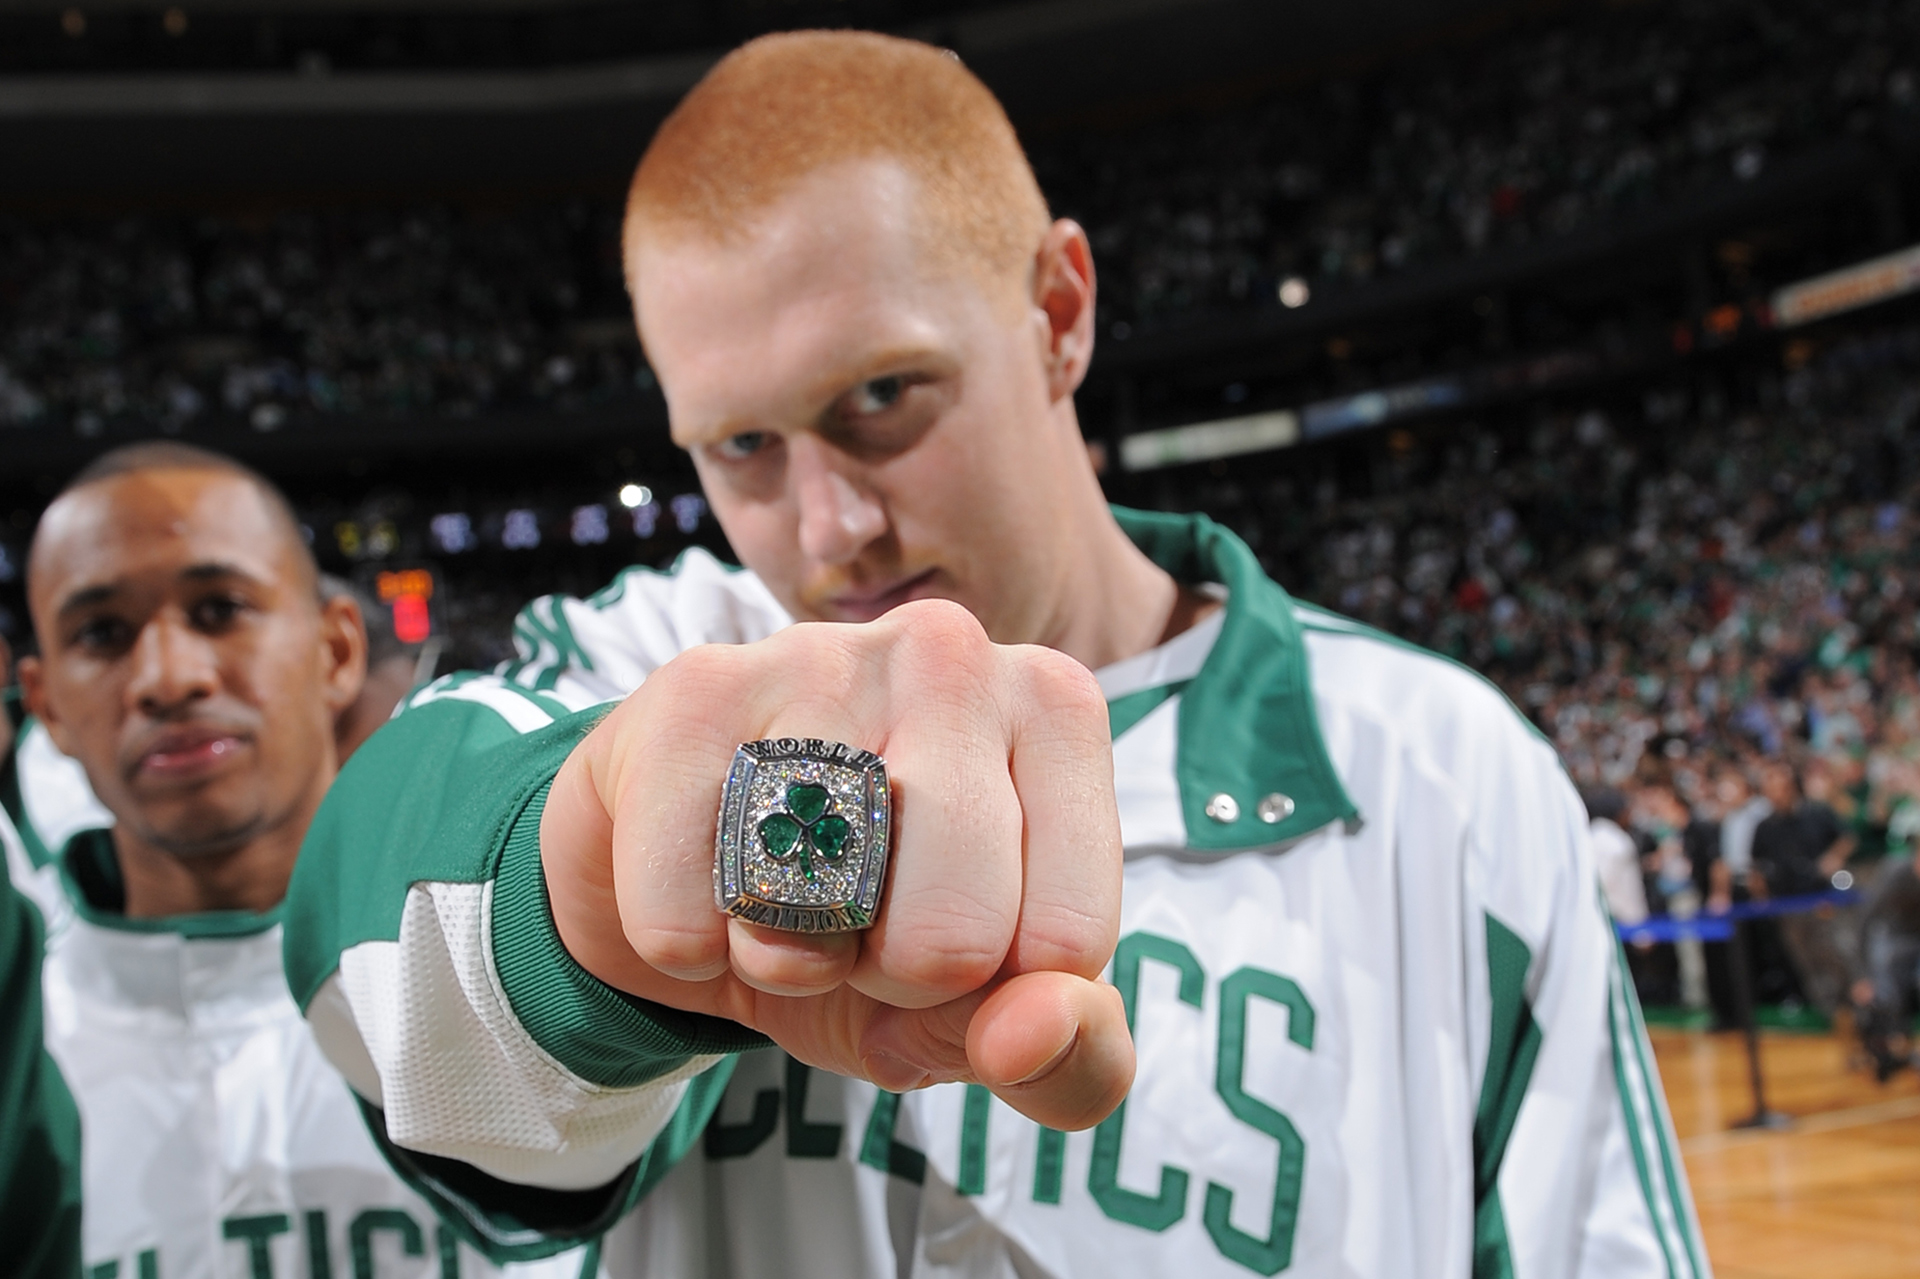 The Ultimate Brian Scalabrine Highlight Video